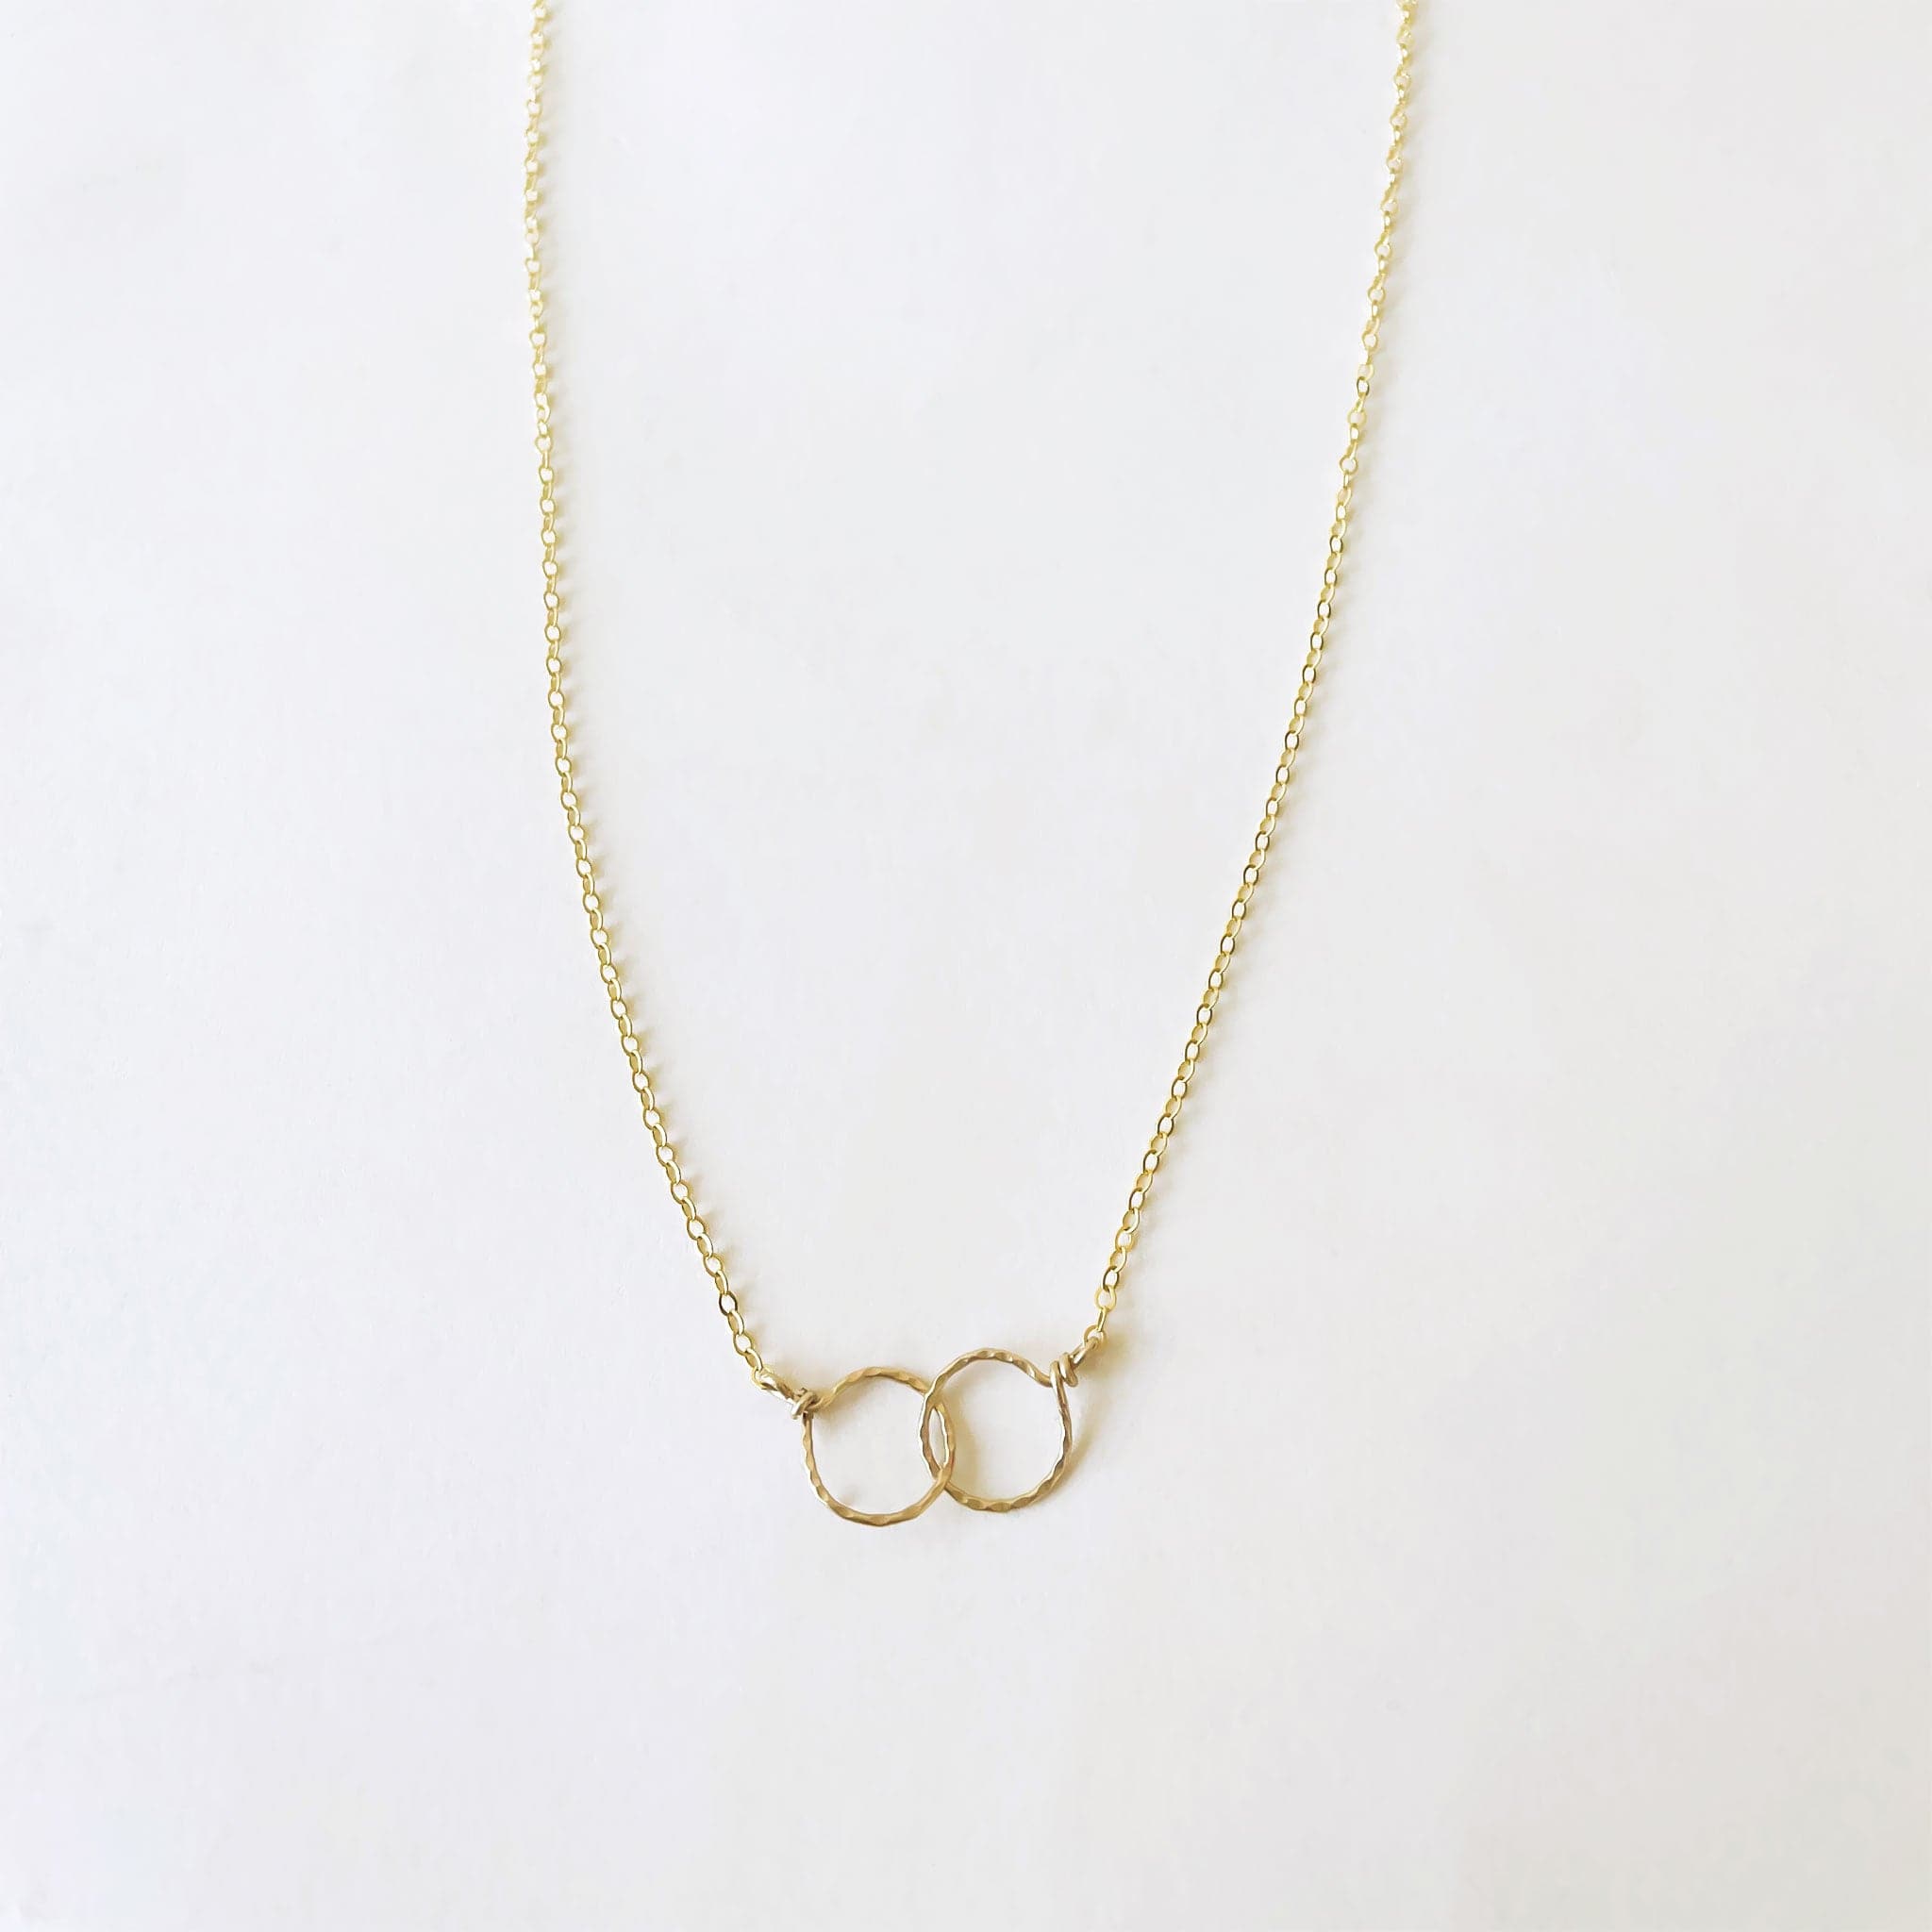 Two hammered 14k gold circles interlocked on a 16" chain.